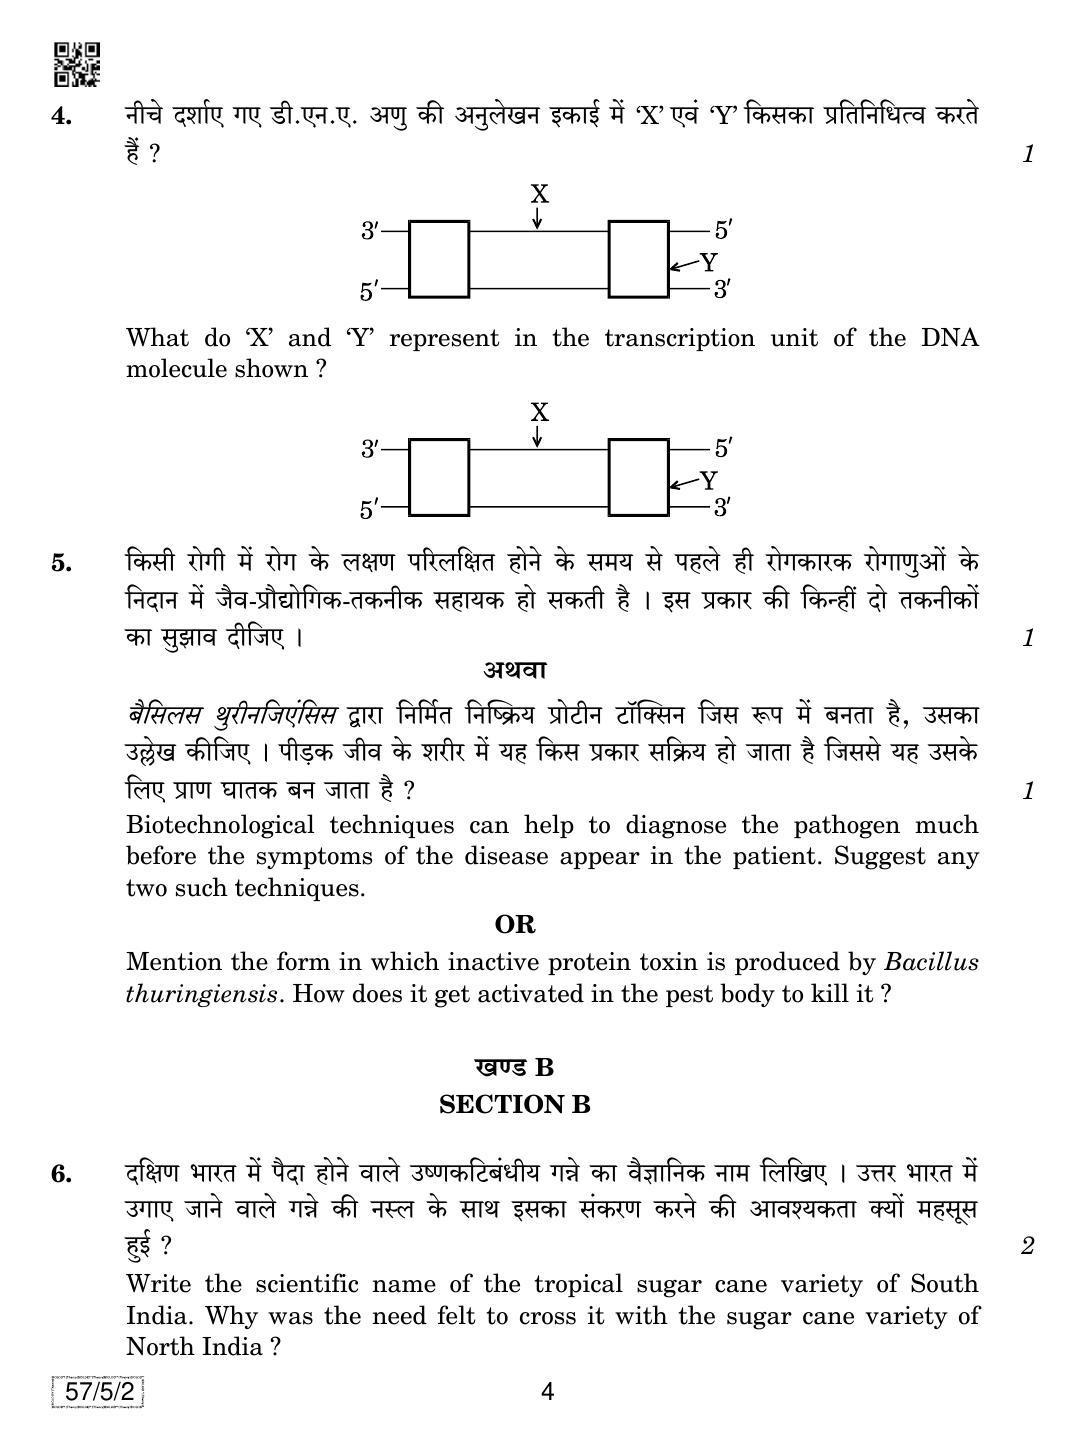 CBSE Class 12 57-5-2 Biology 2019 Question Paper - Page 4